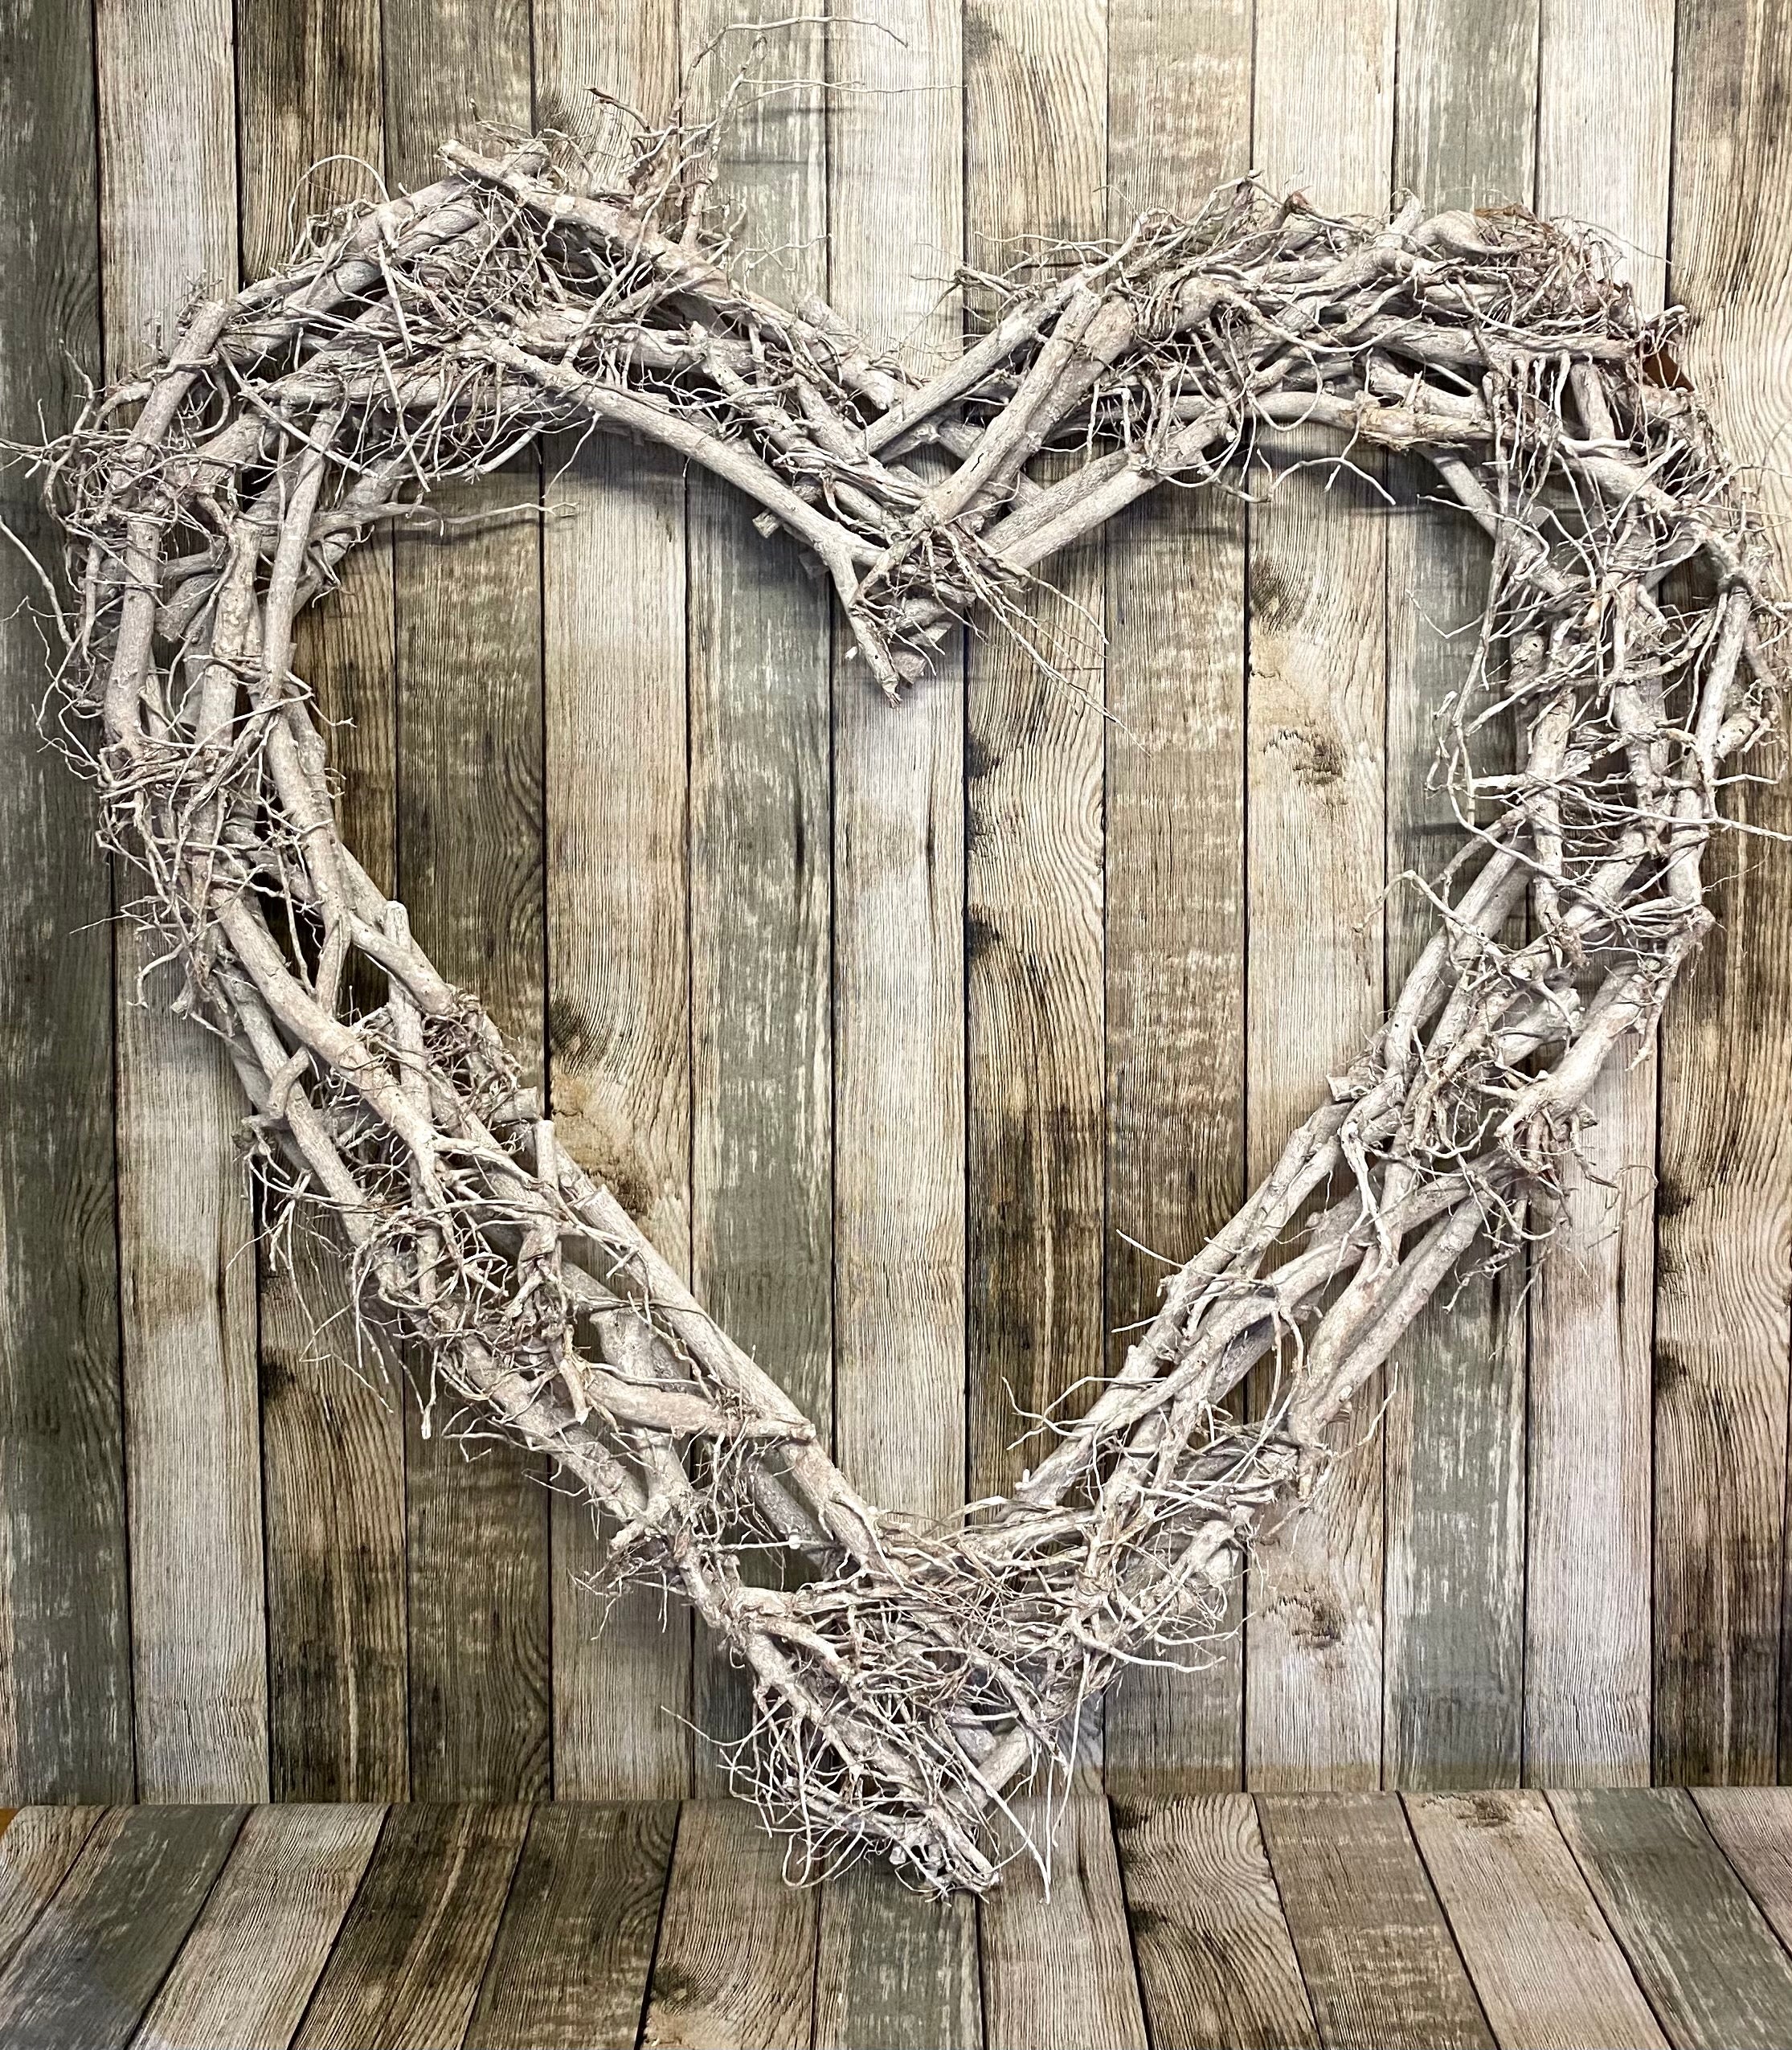 Extra Large Cotton Root and Wood Rustic Decorative Feature Heart - White Washed - Kate's Cupboard